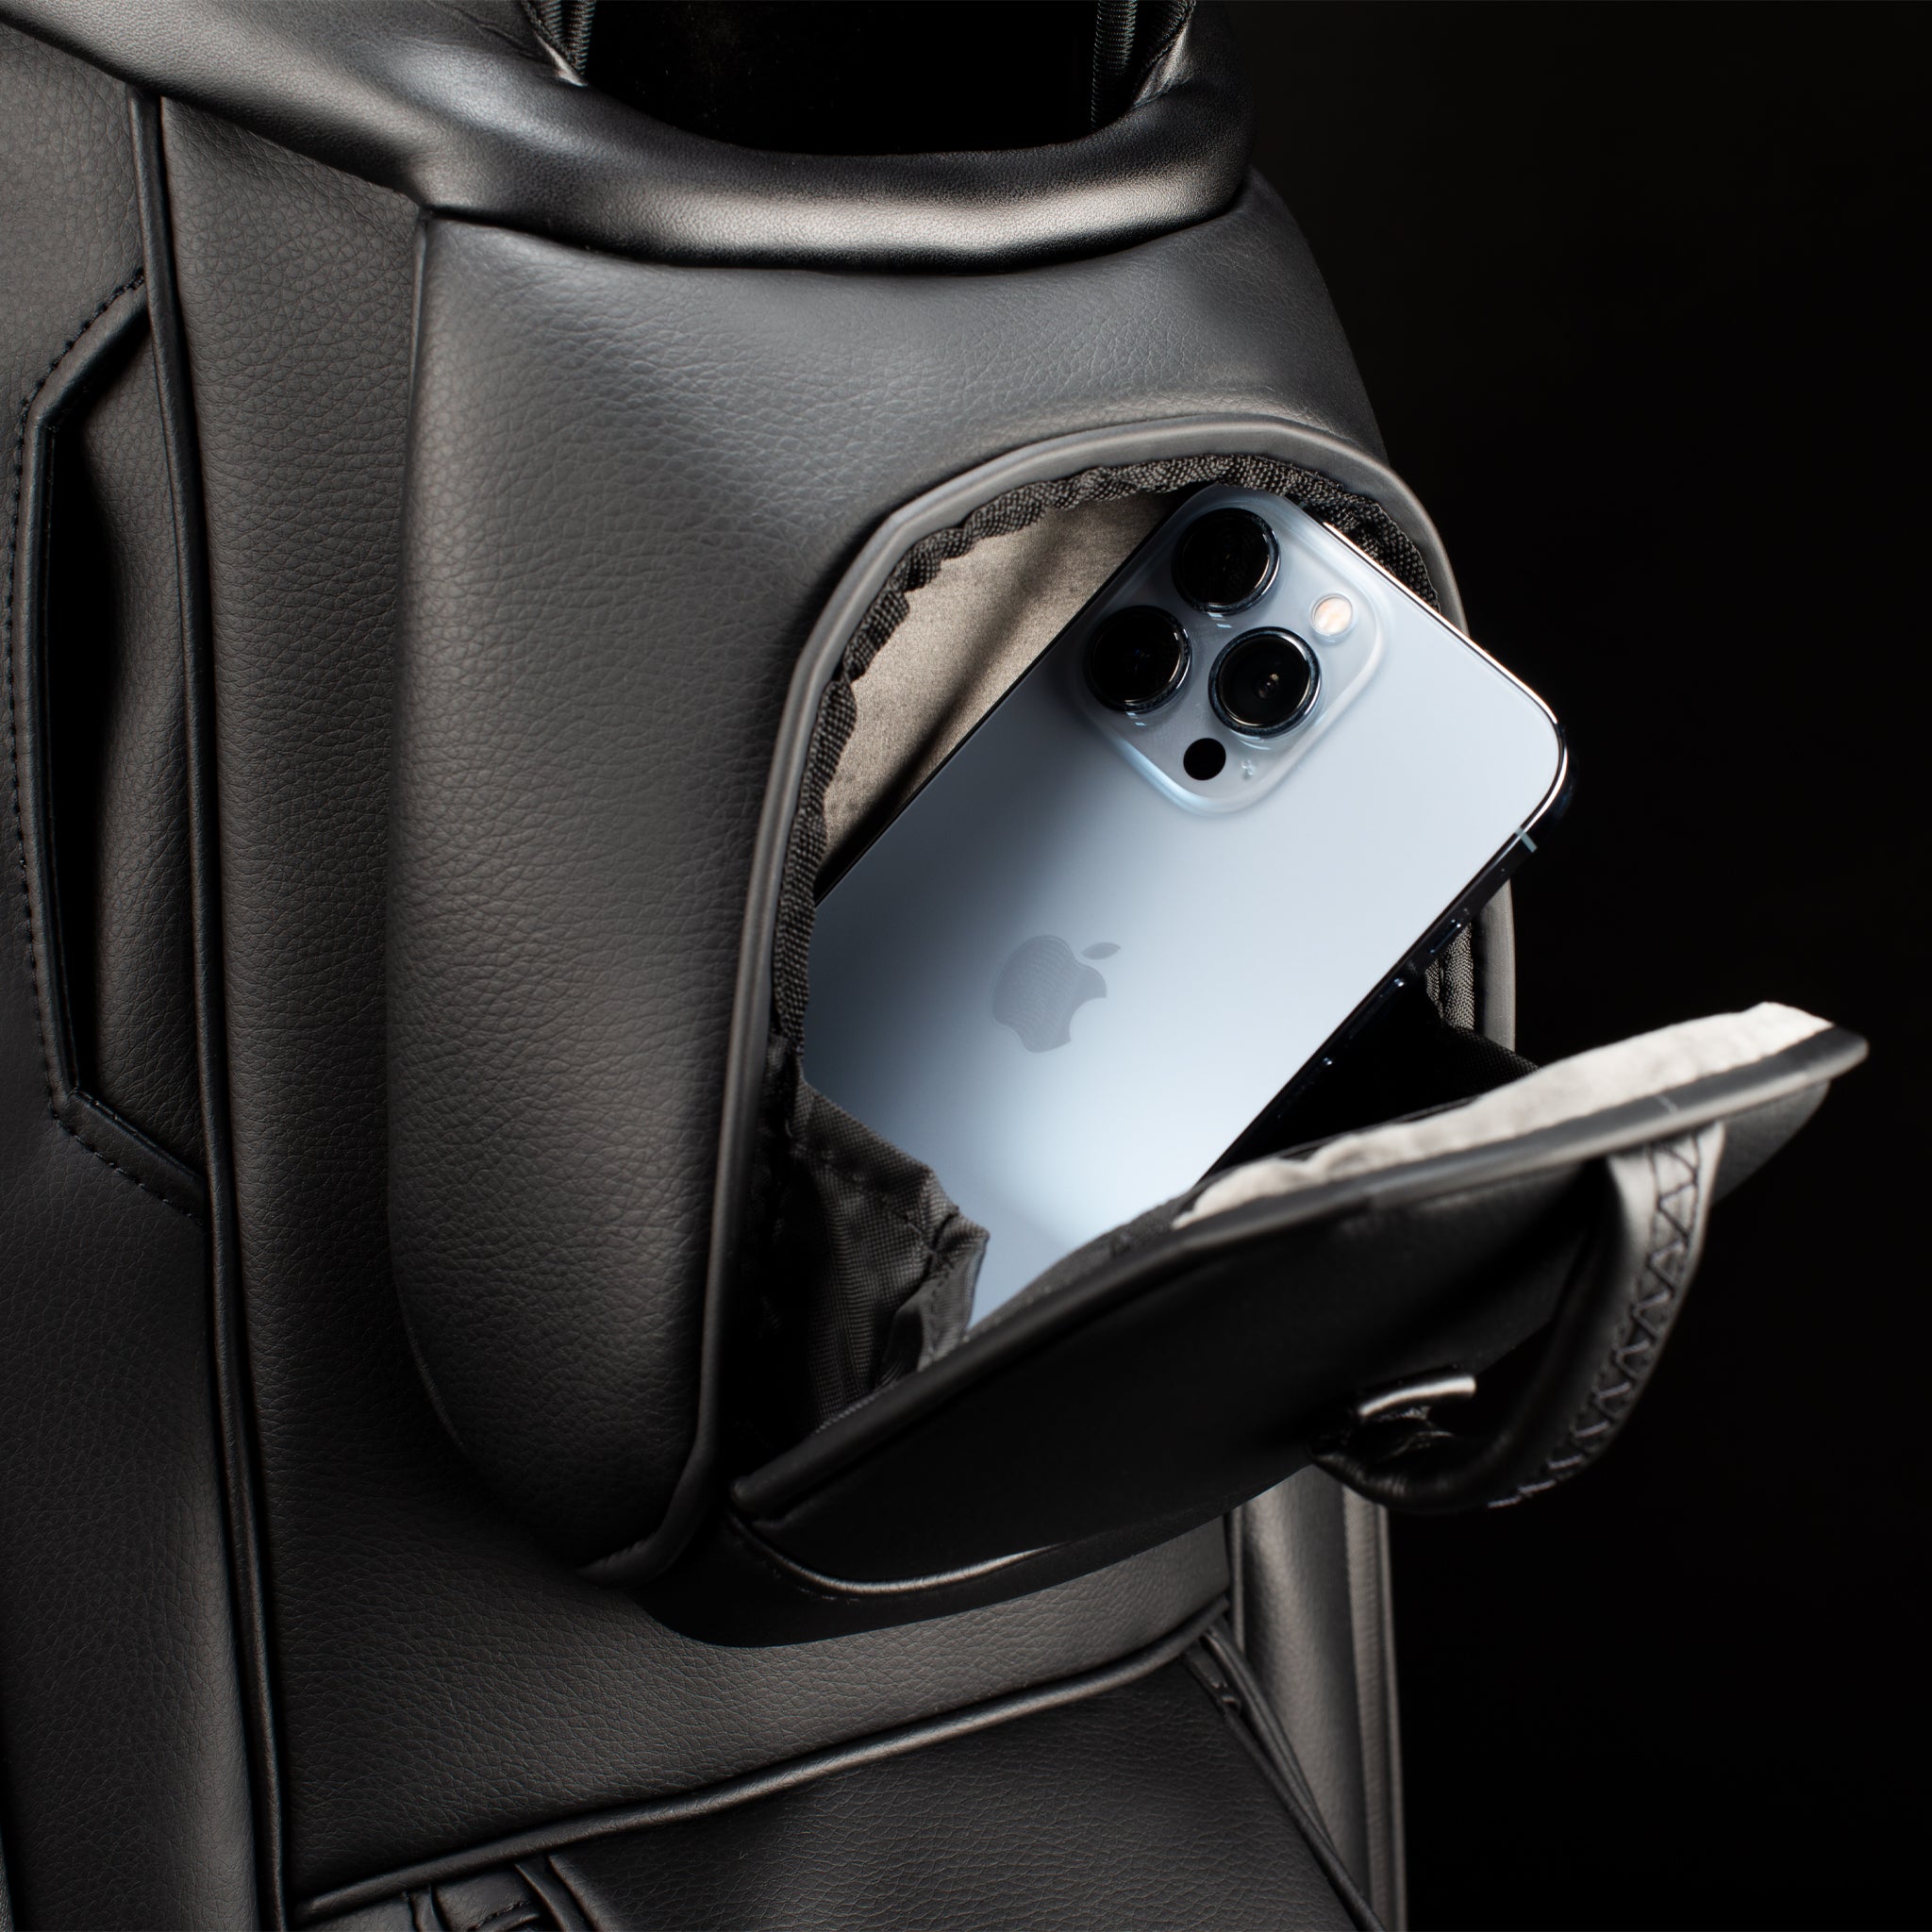 Close up magnetic pocket on black leather golf cart bag with phone sticking out